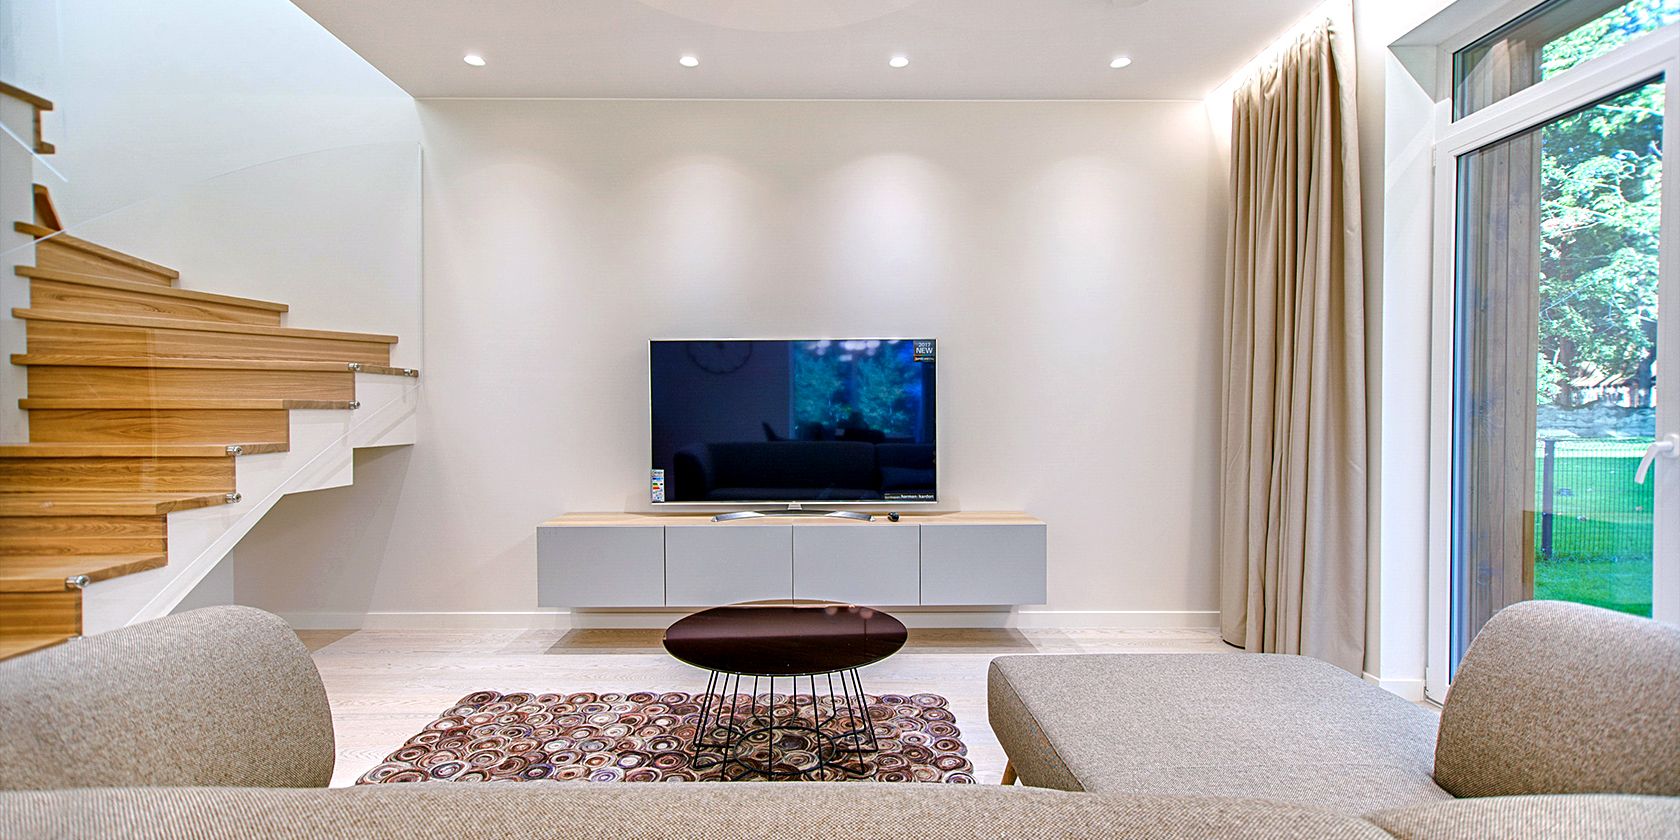 TV in a bright living room